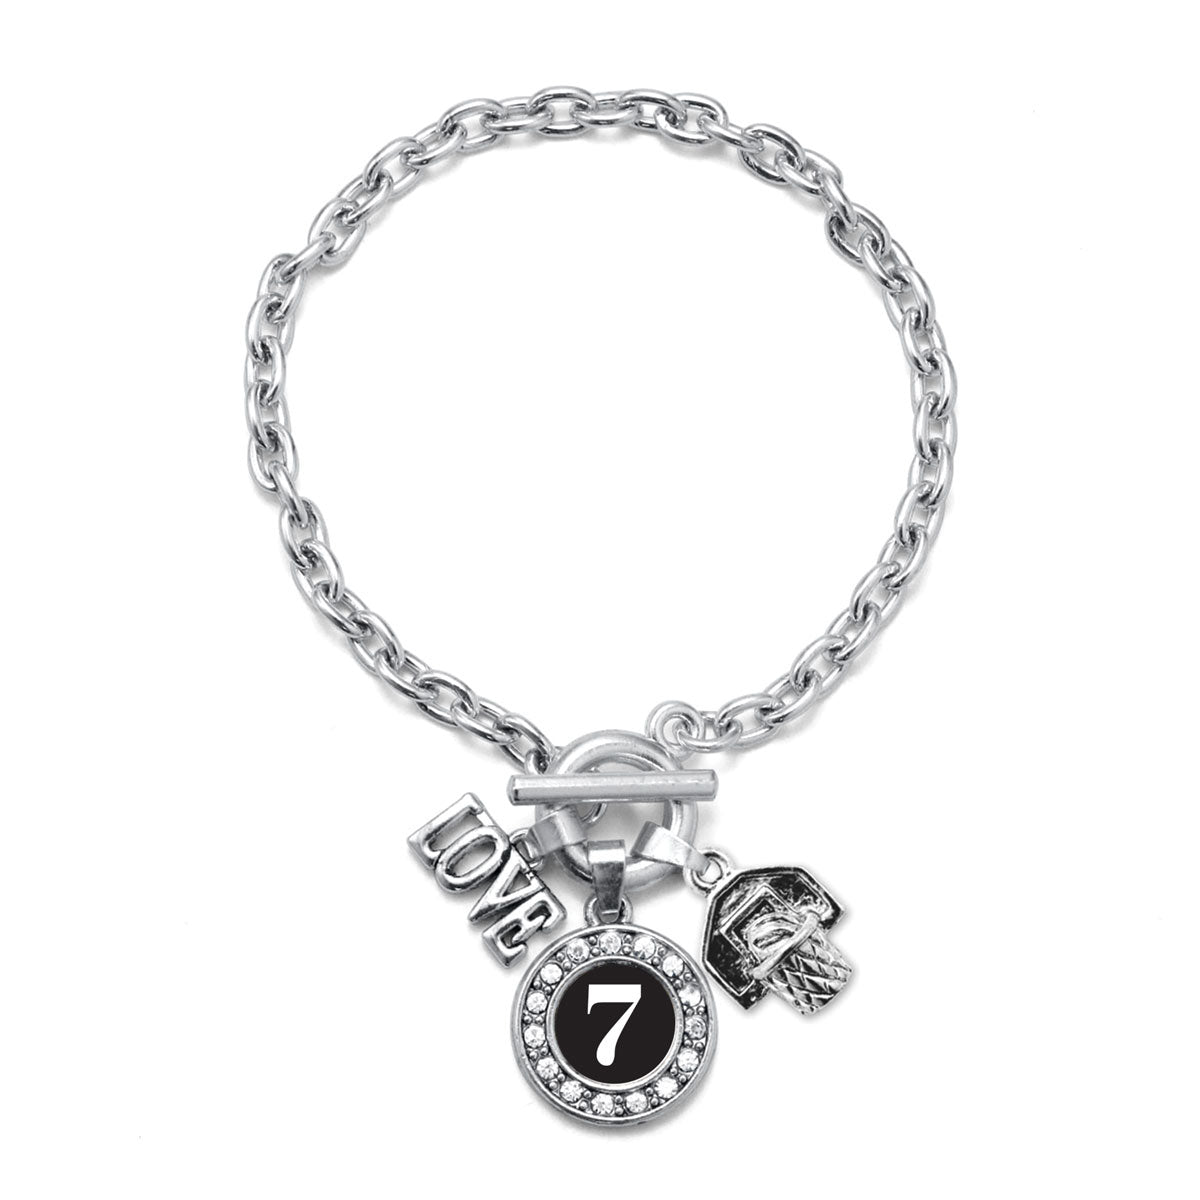 Silver Basketball Hoop - Sports Number 7 Circle Charm Toggle Bracelet